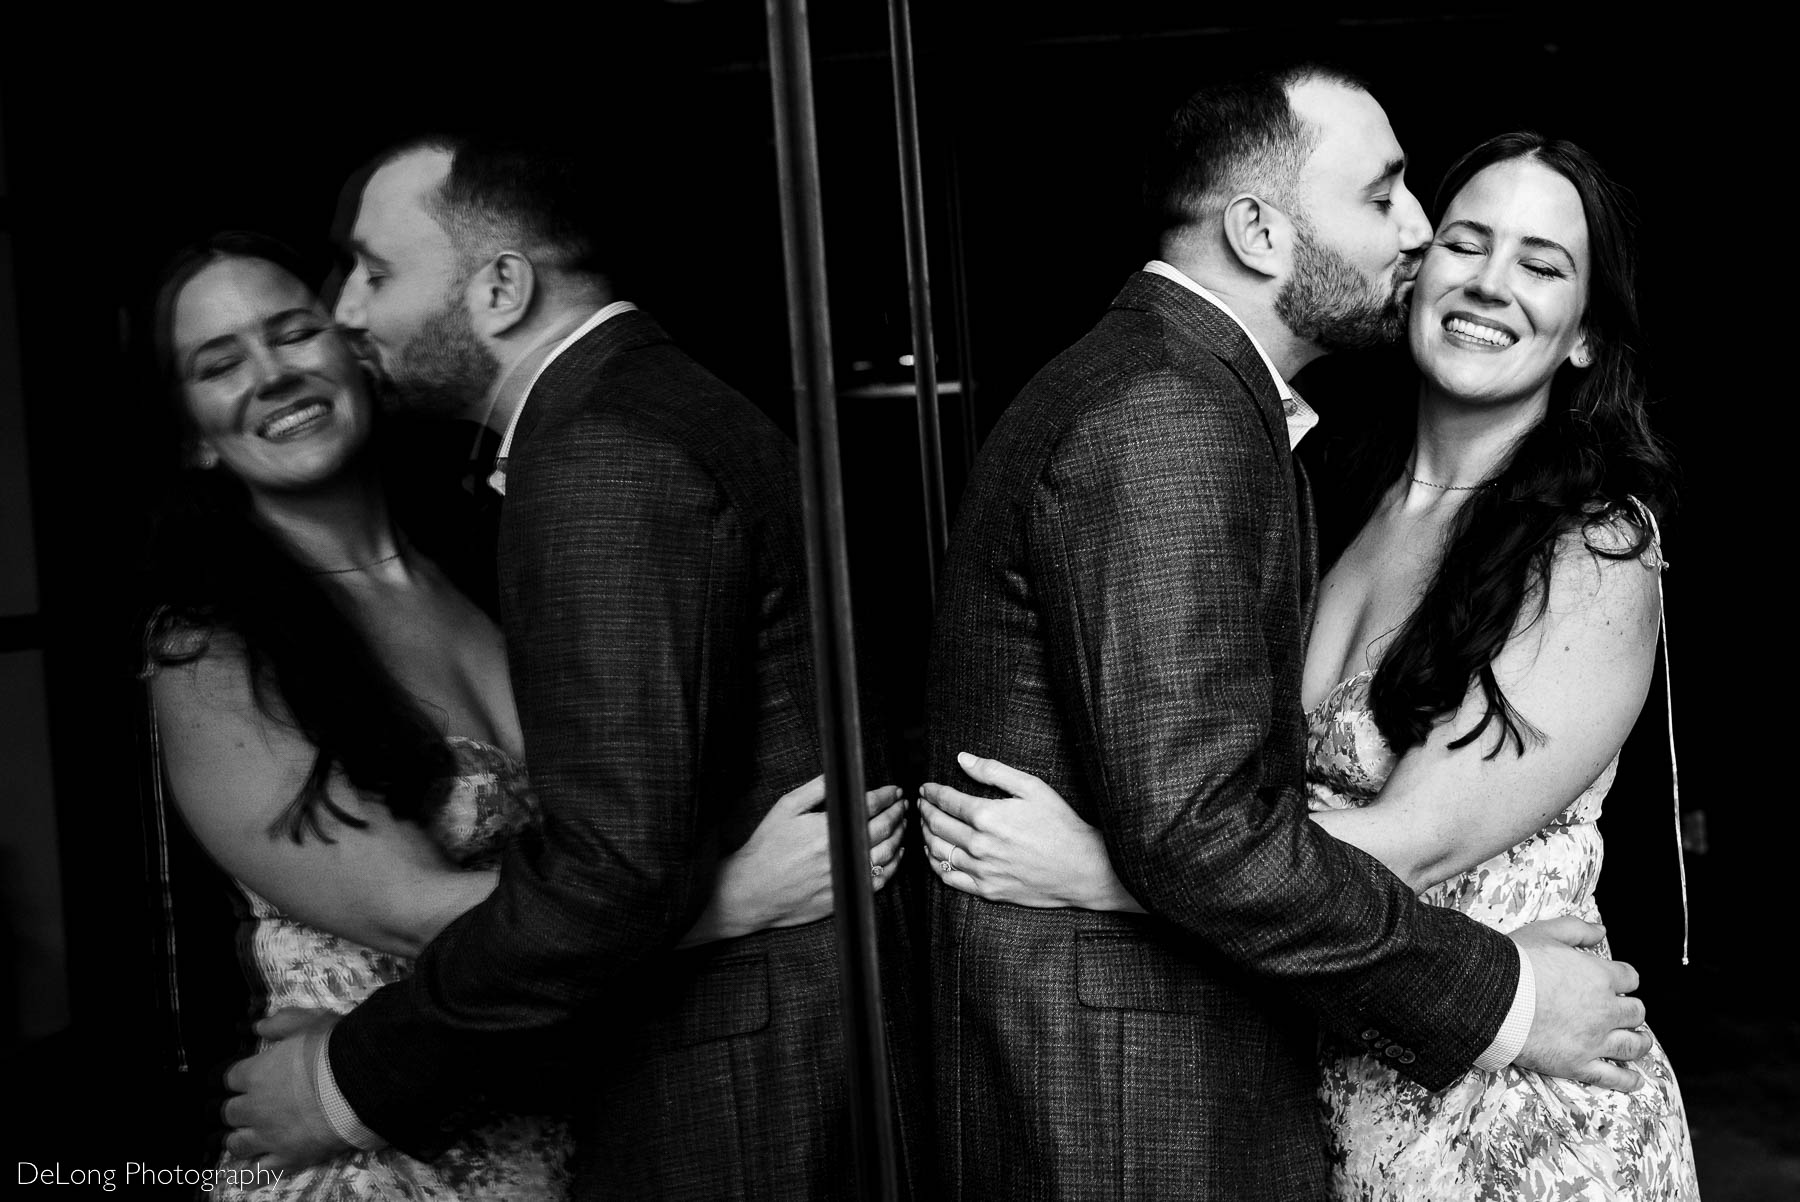 Black and white window reflection image of a man kissing his fiancée's cheek as she smiles with her eyes closed giggling at Westside Provisions in Atlanta by Charlotte Wedding Photographers DeLong Photography